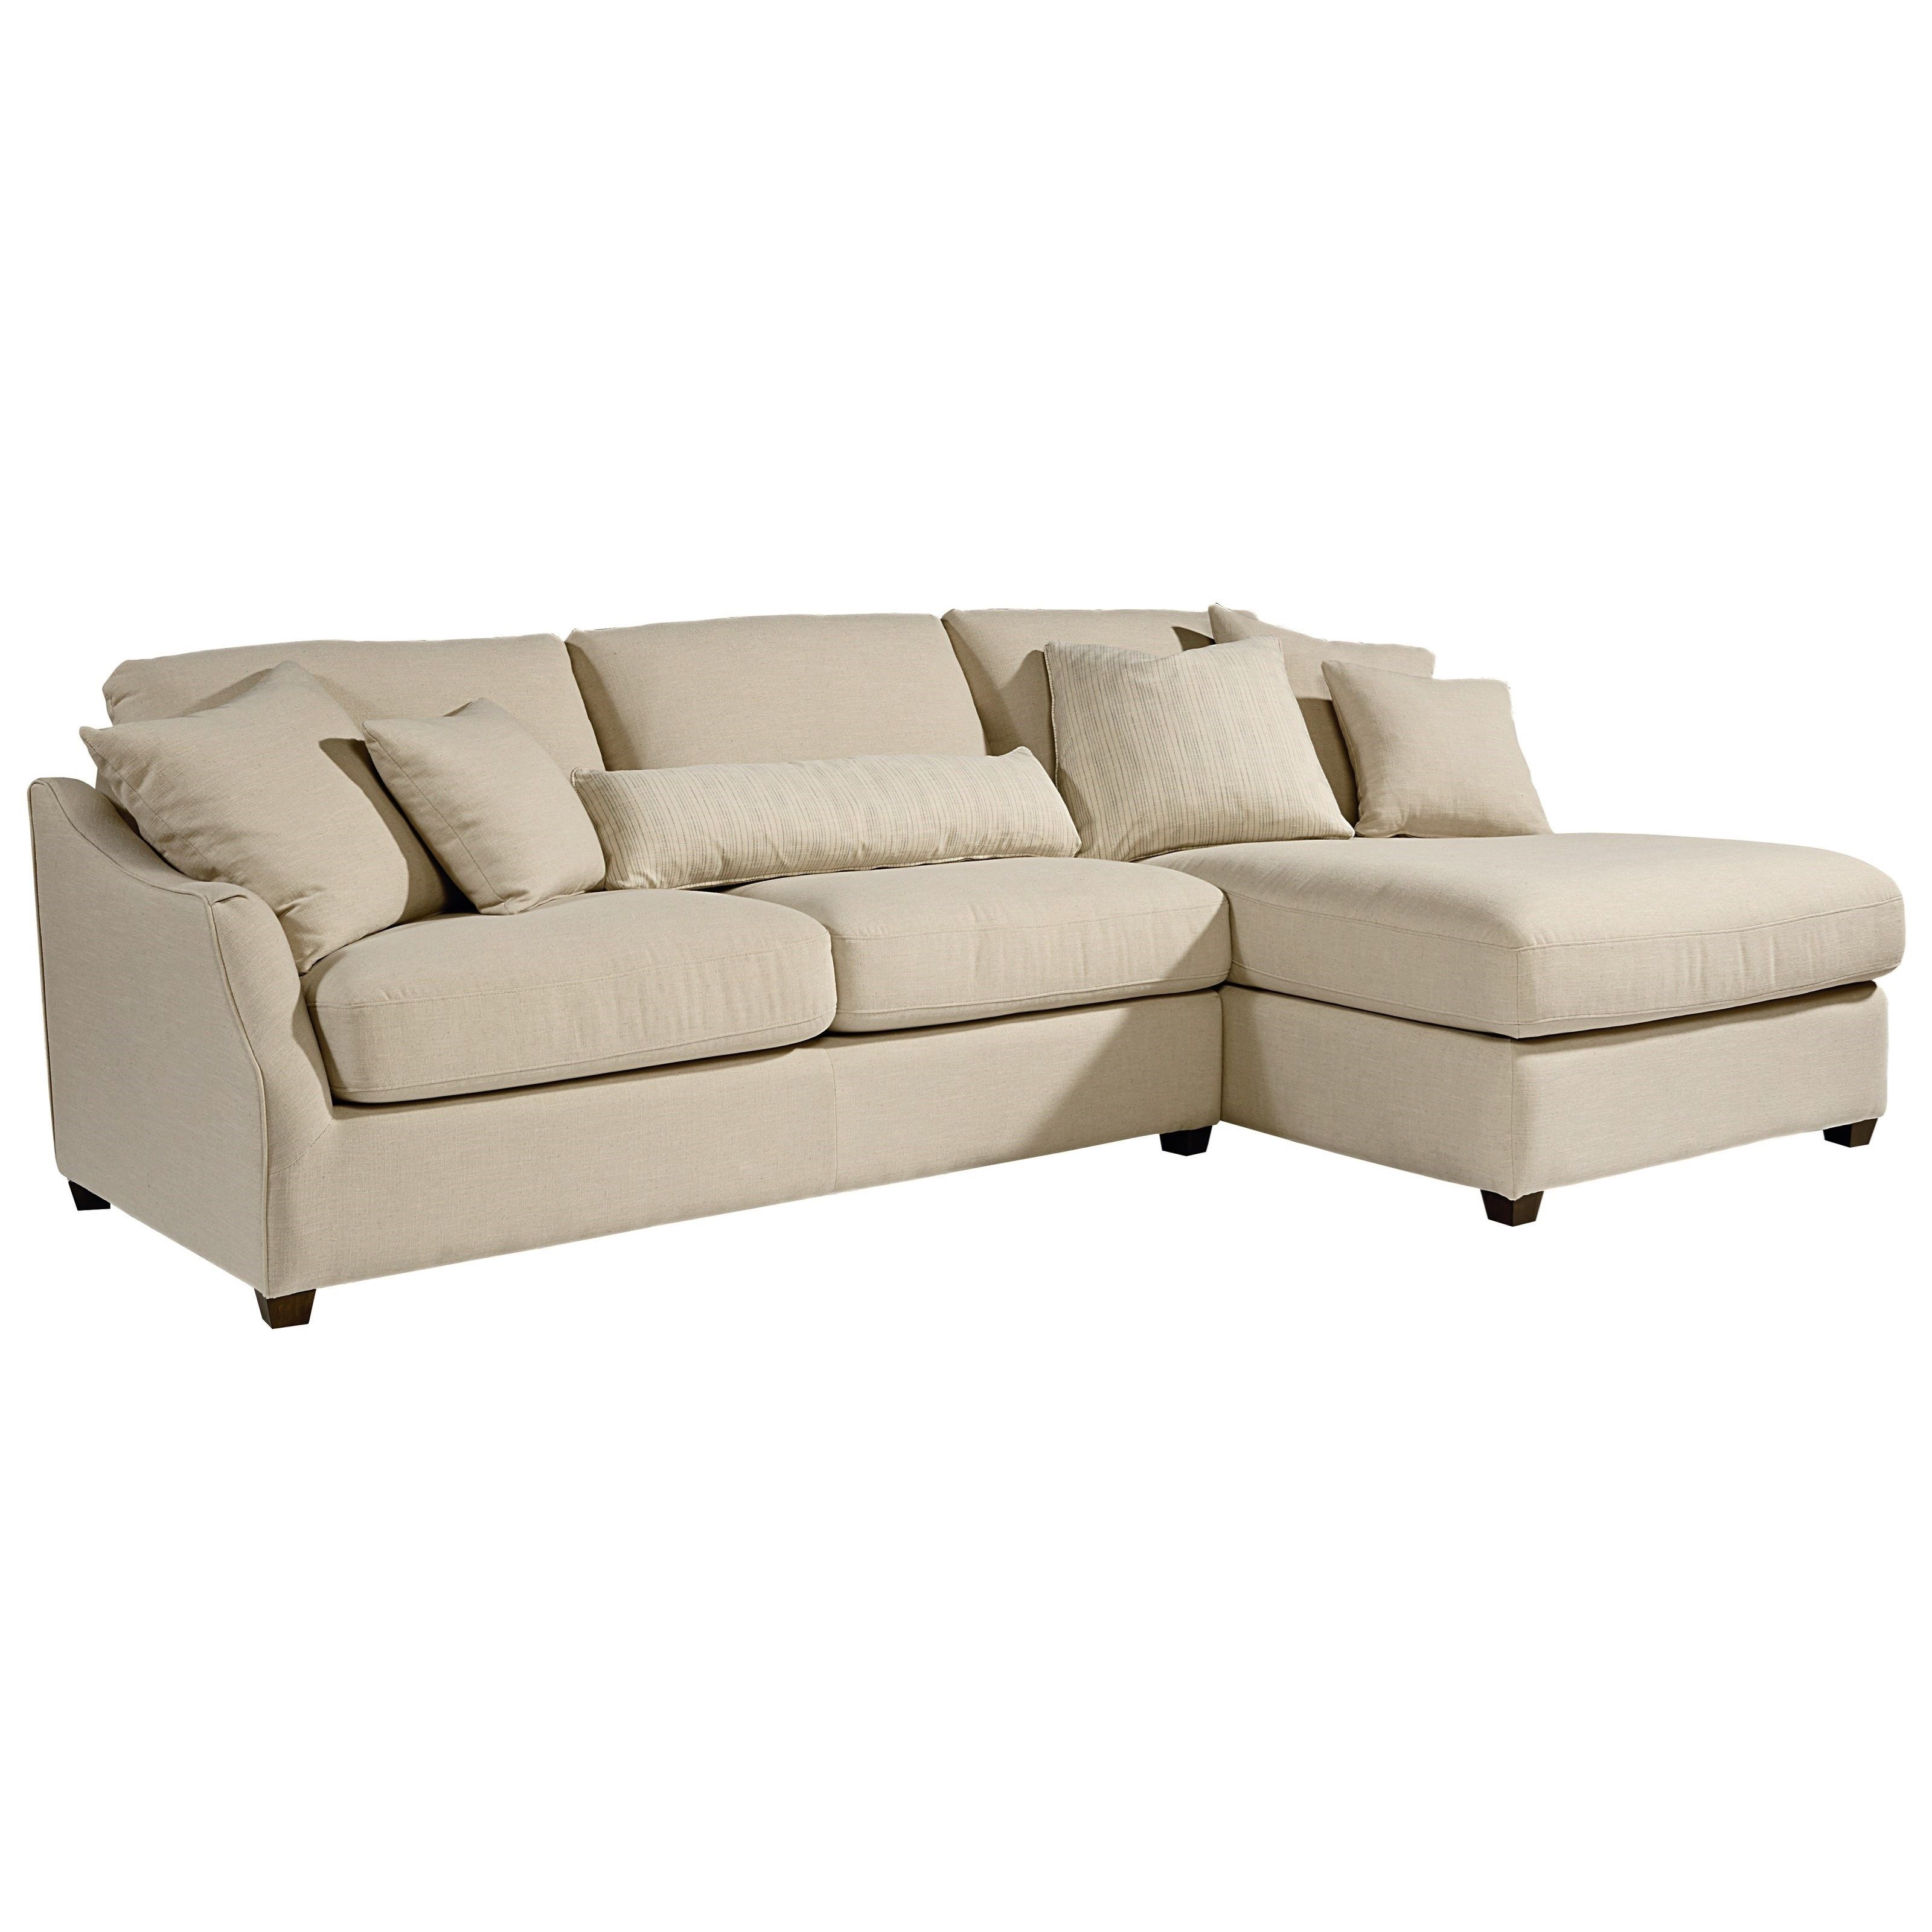 Magnolia Homejoanna Gaines Homestead Sofa Chaise With Raf Chaise Inside Magnolia Home Homestead 3 Piece Sectionals By Joanna Gaines (Photo 1 of 25)